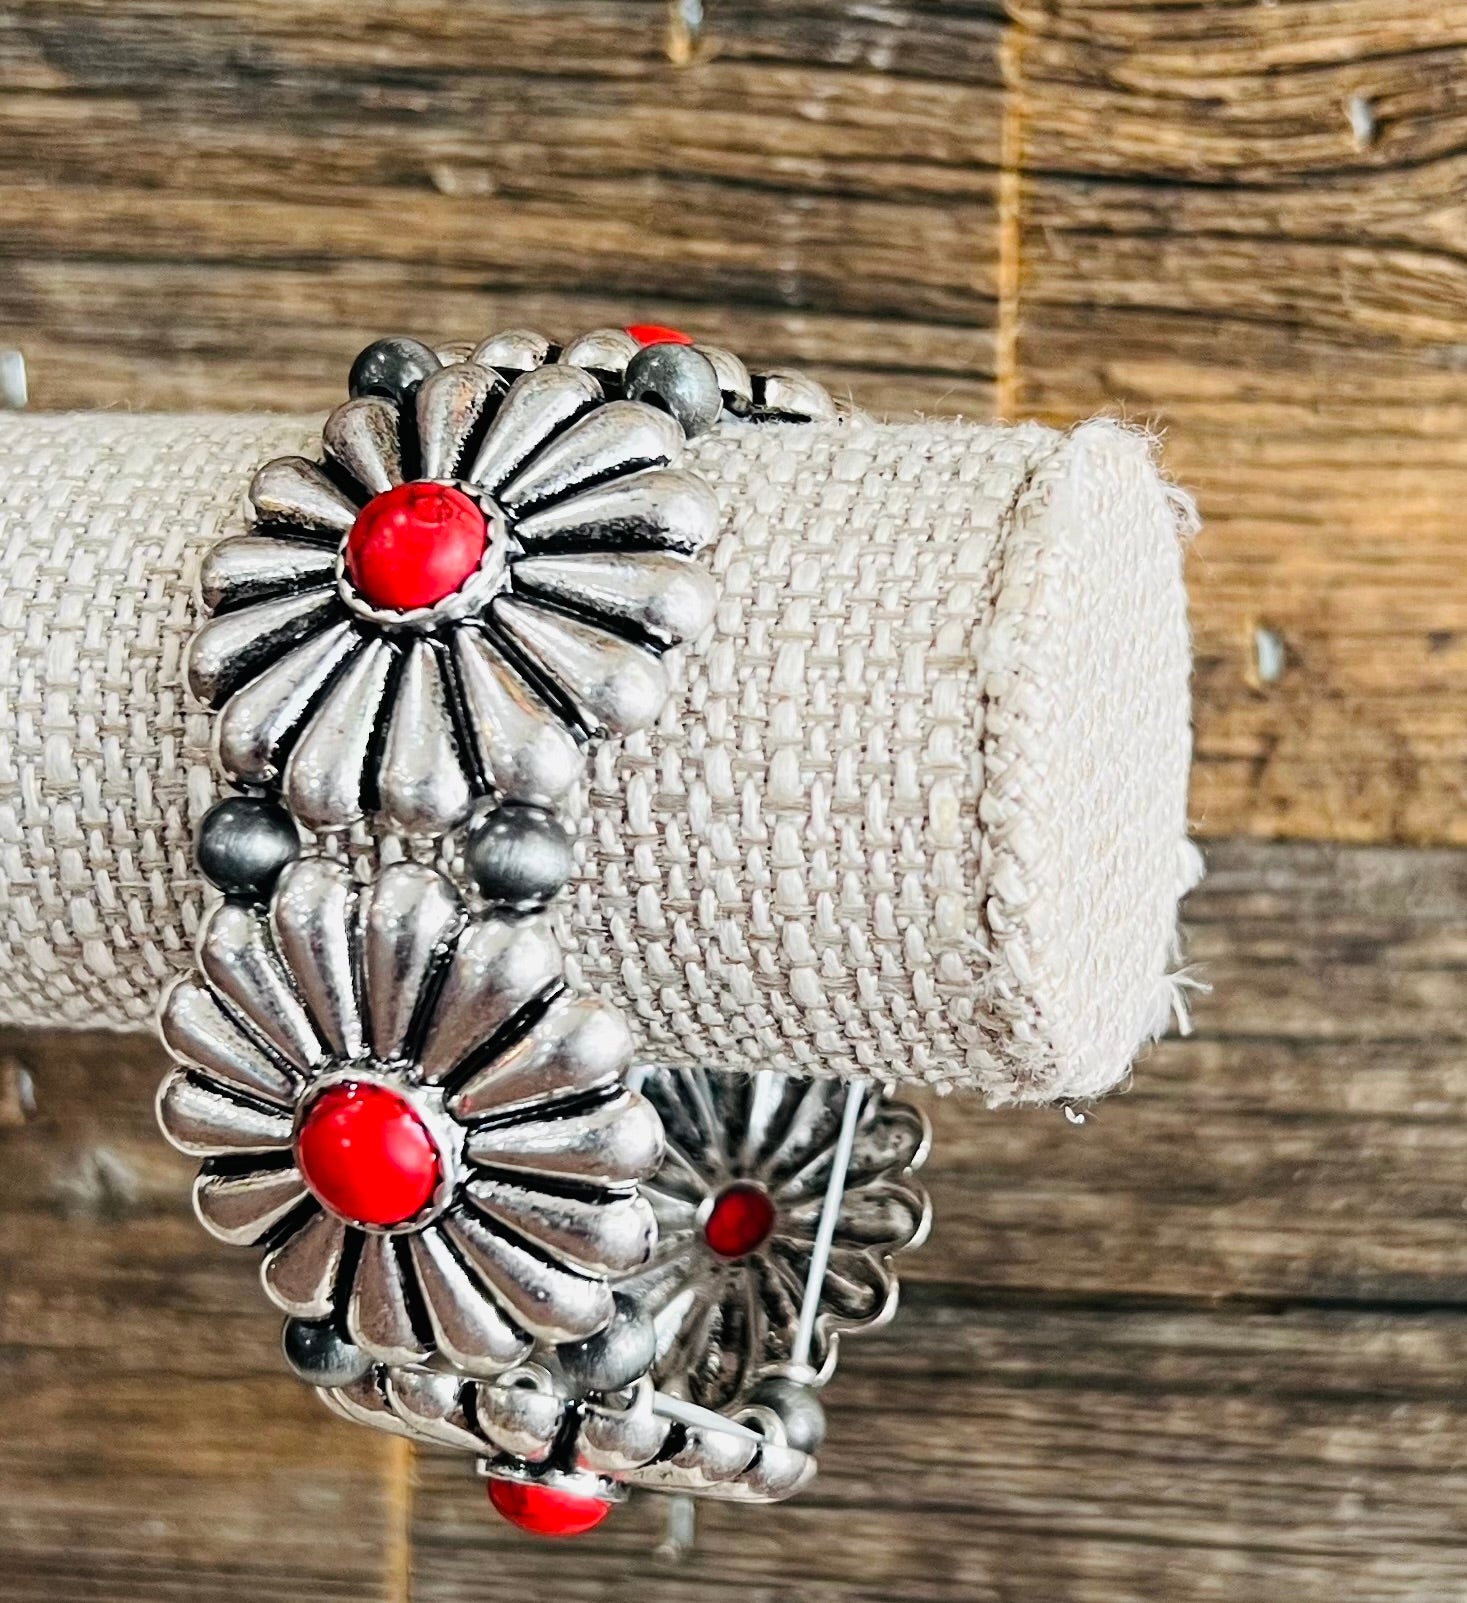 Silver Concho Bracelets with Center Stones in Red